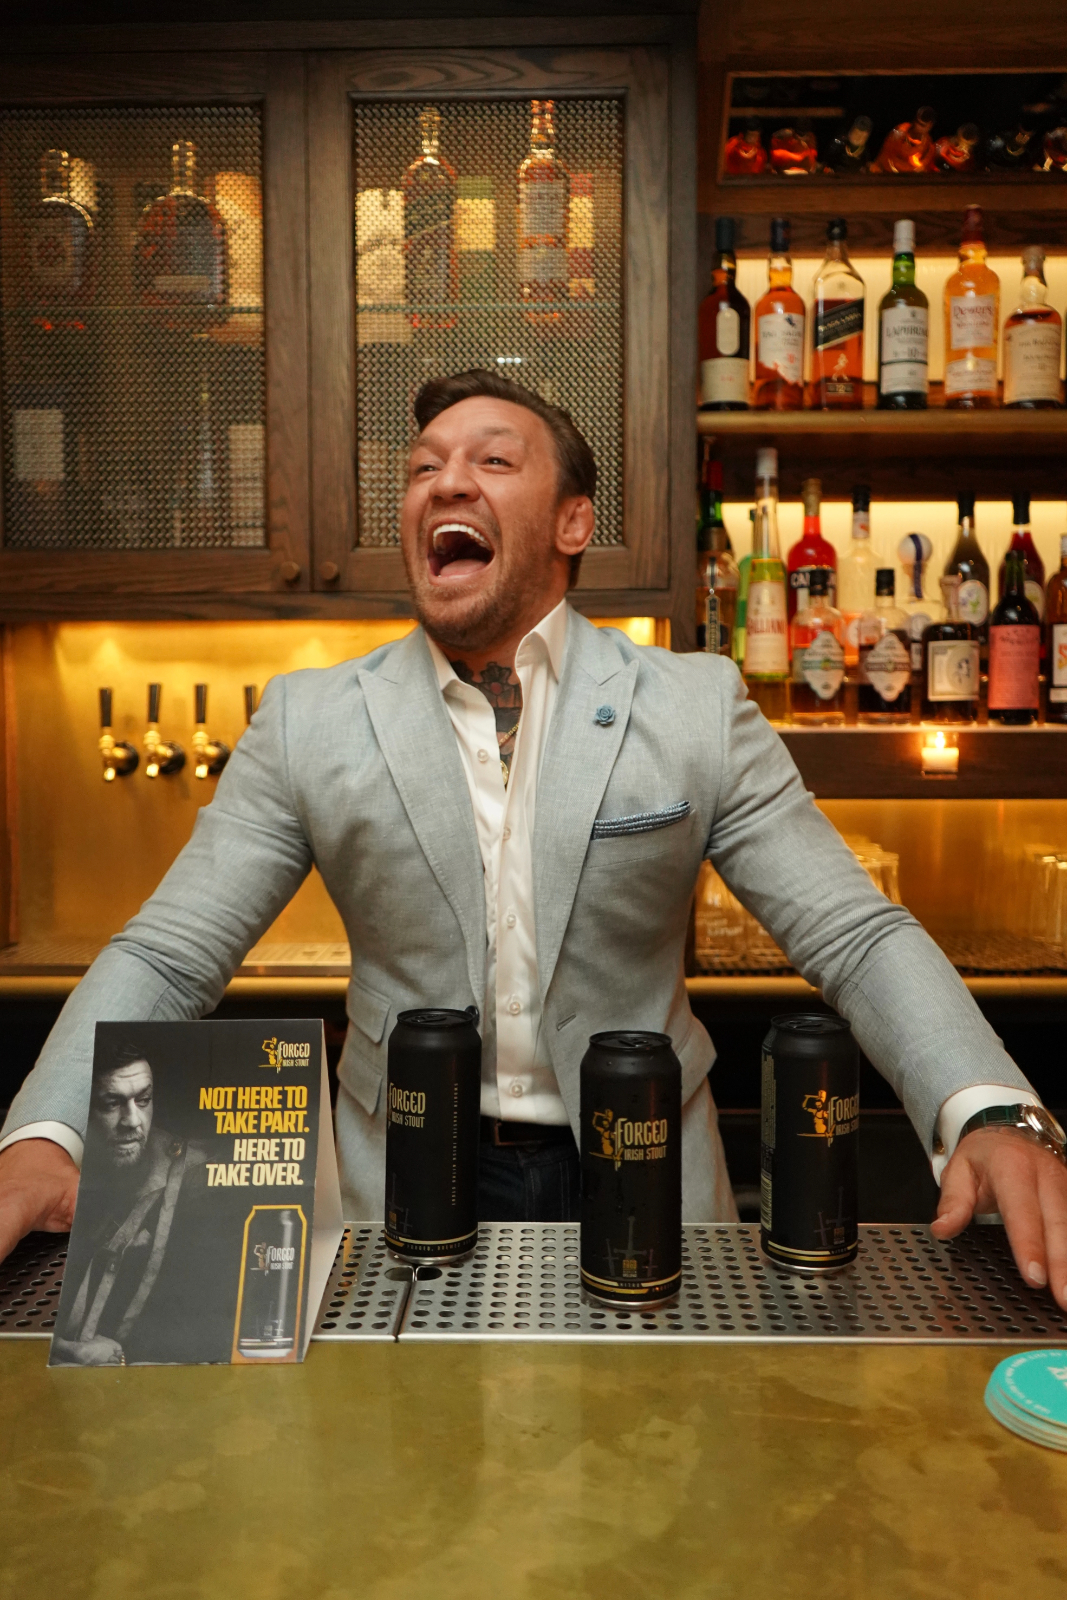 Conor McGregor's Forged Irish Stout erect 14-foot statue of Katie